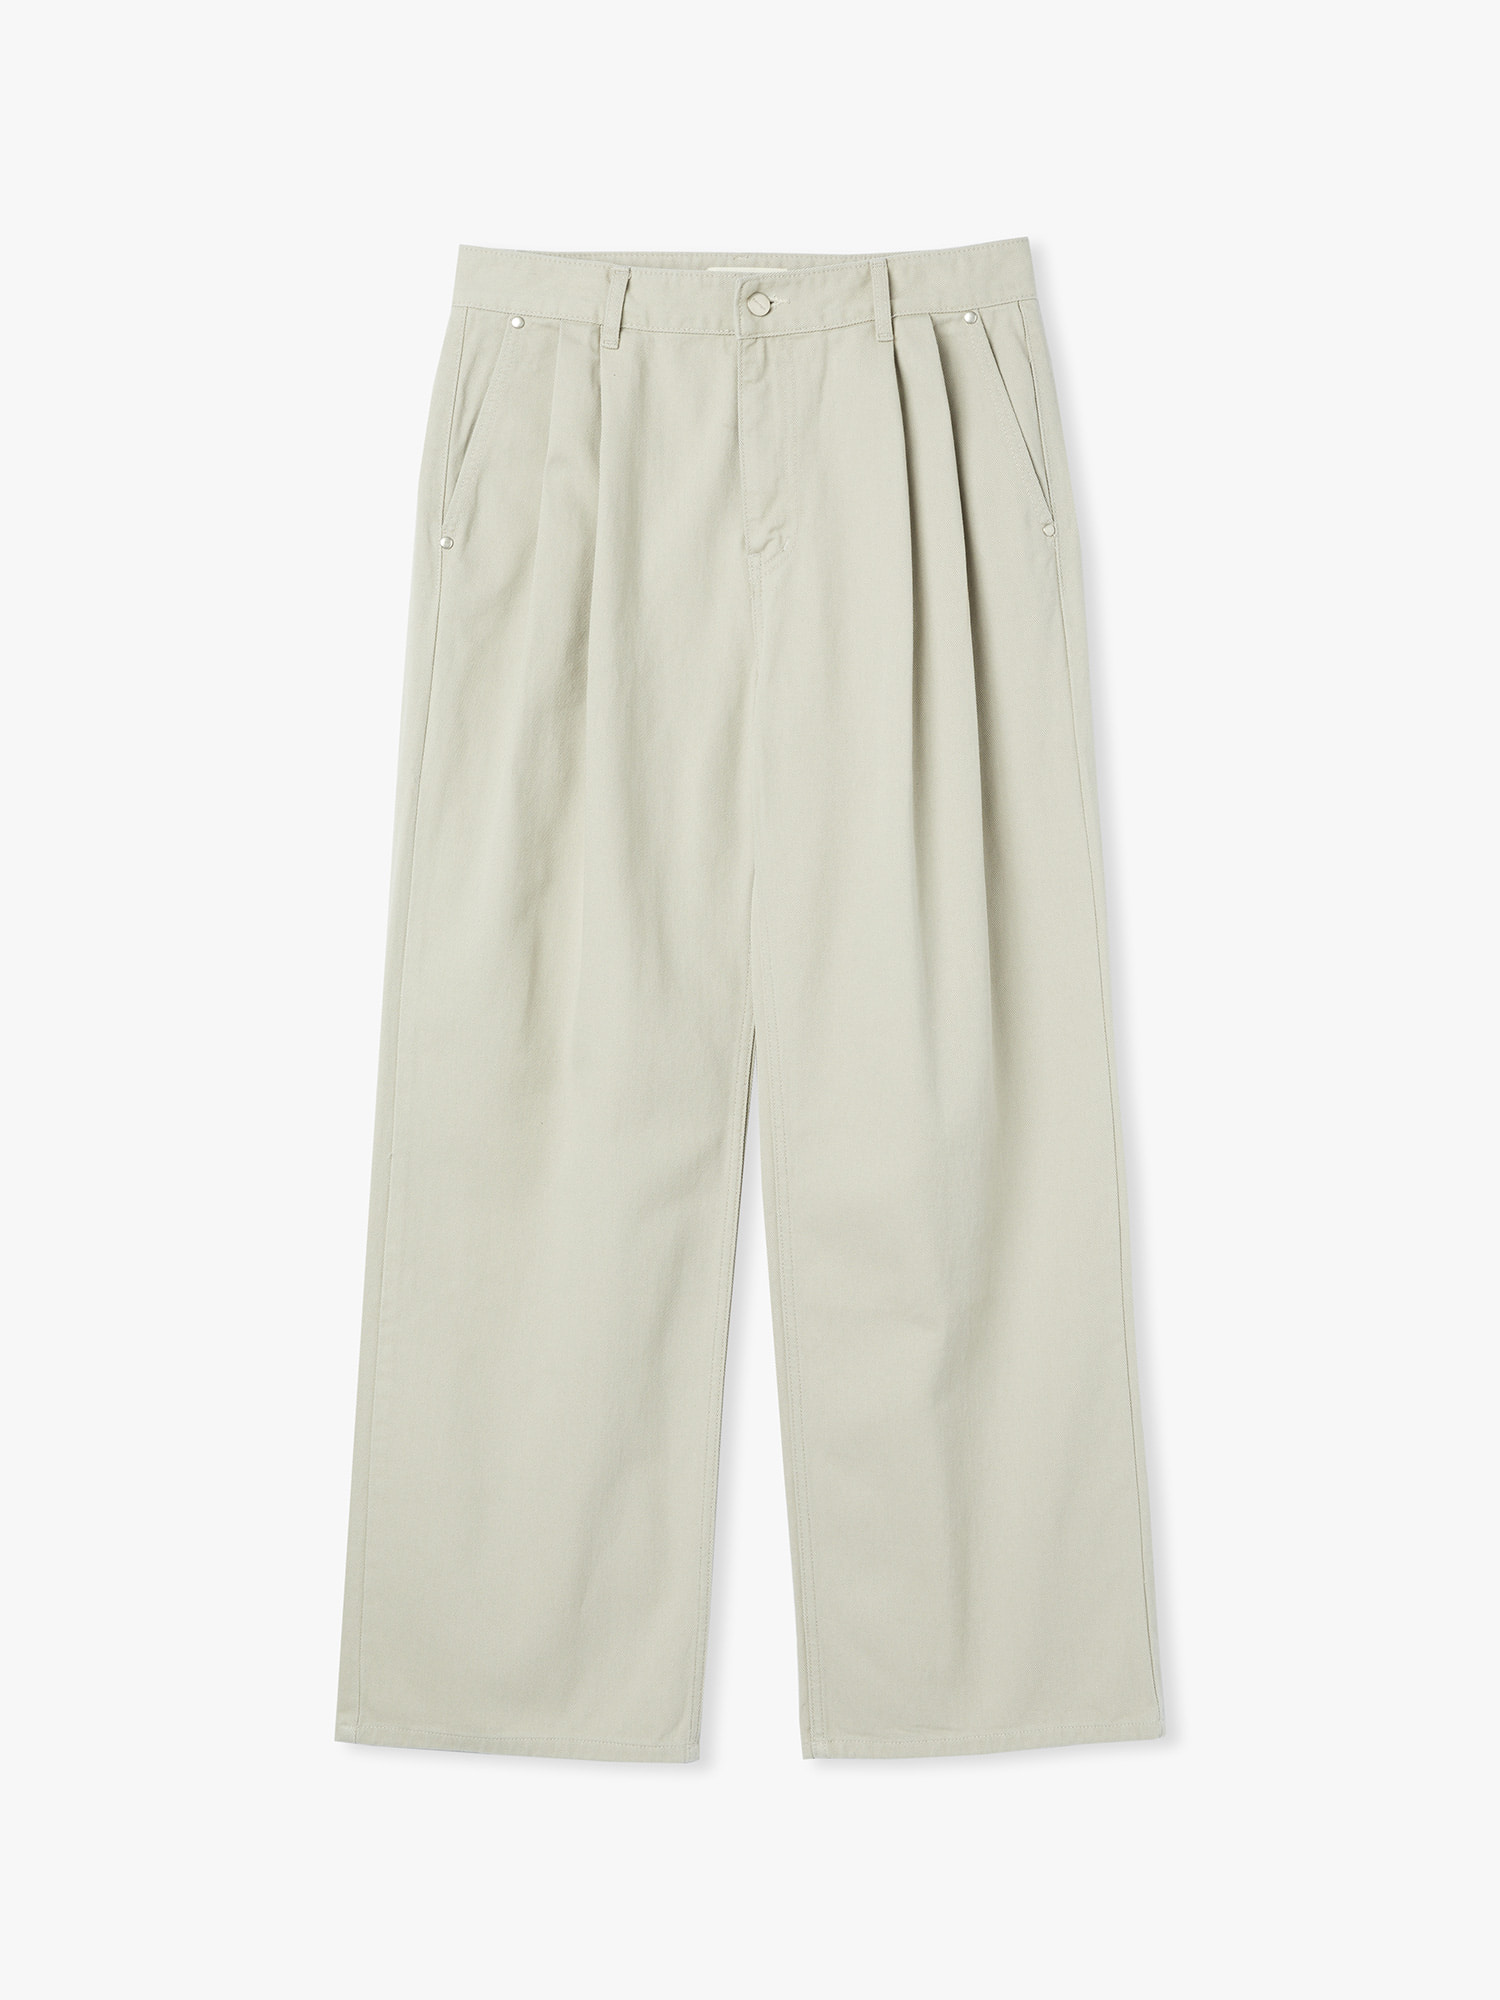 French Two Tuck Chino Pants (Warm Gray)